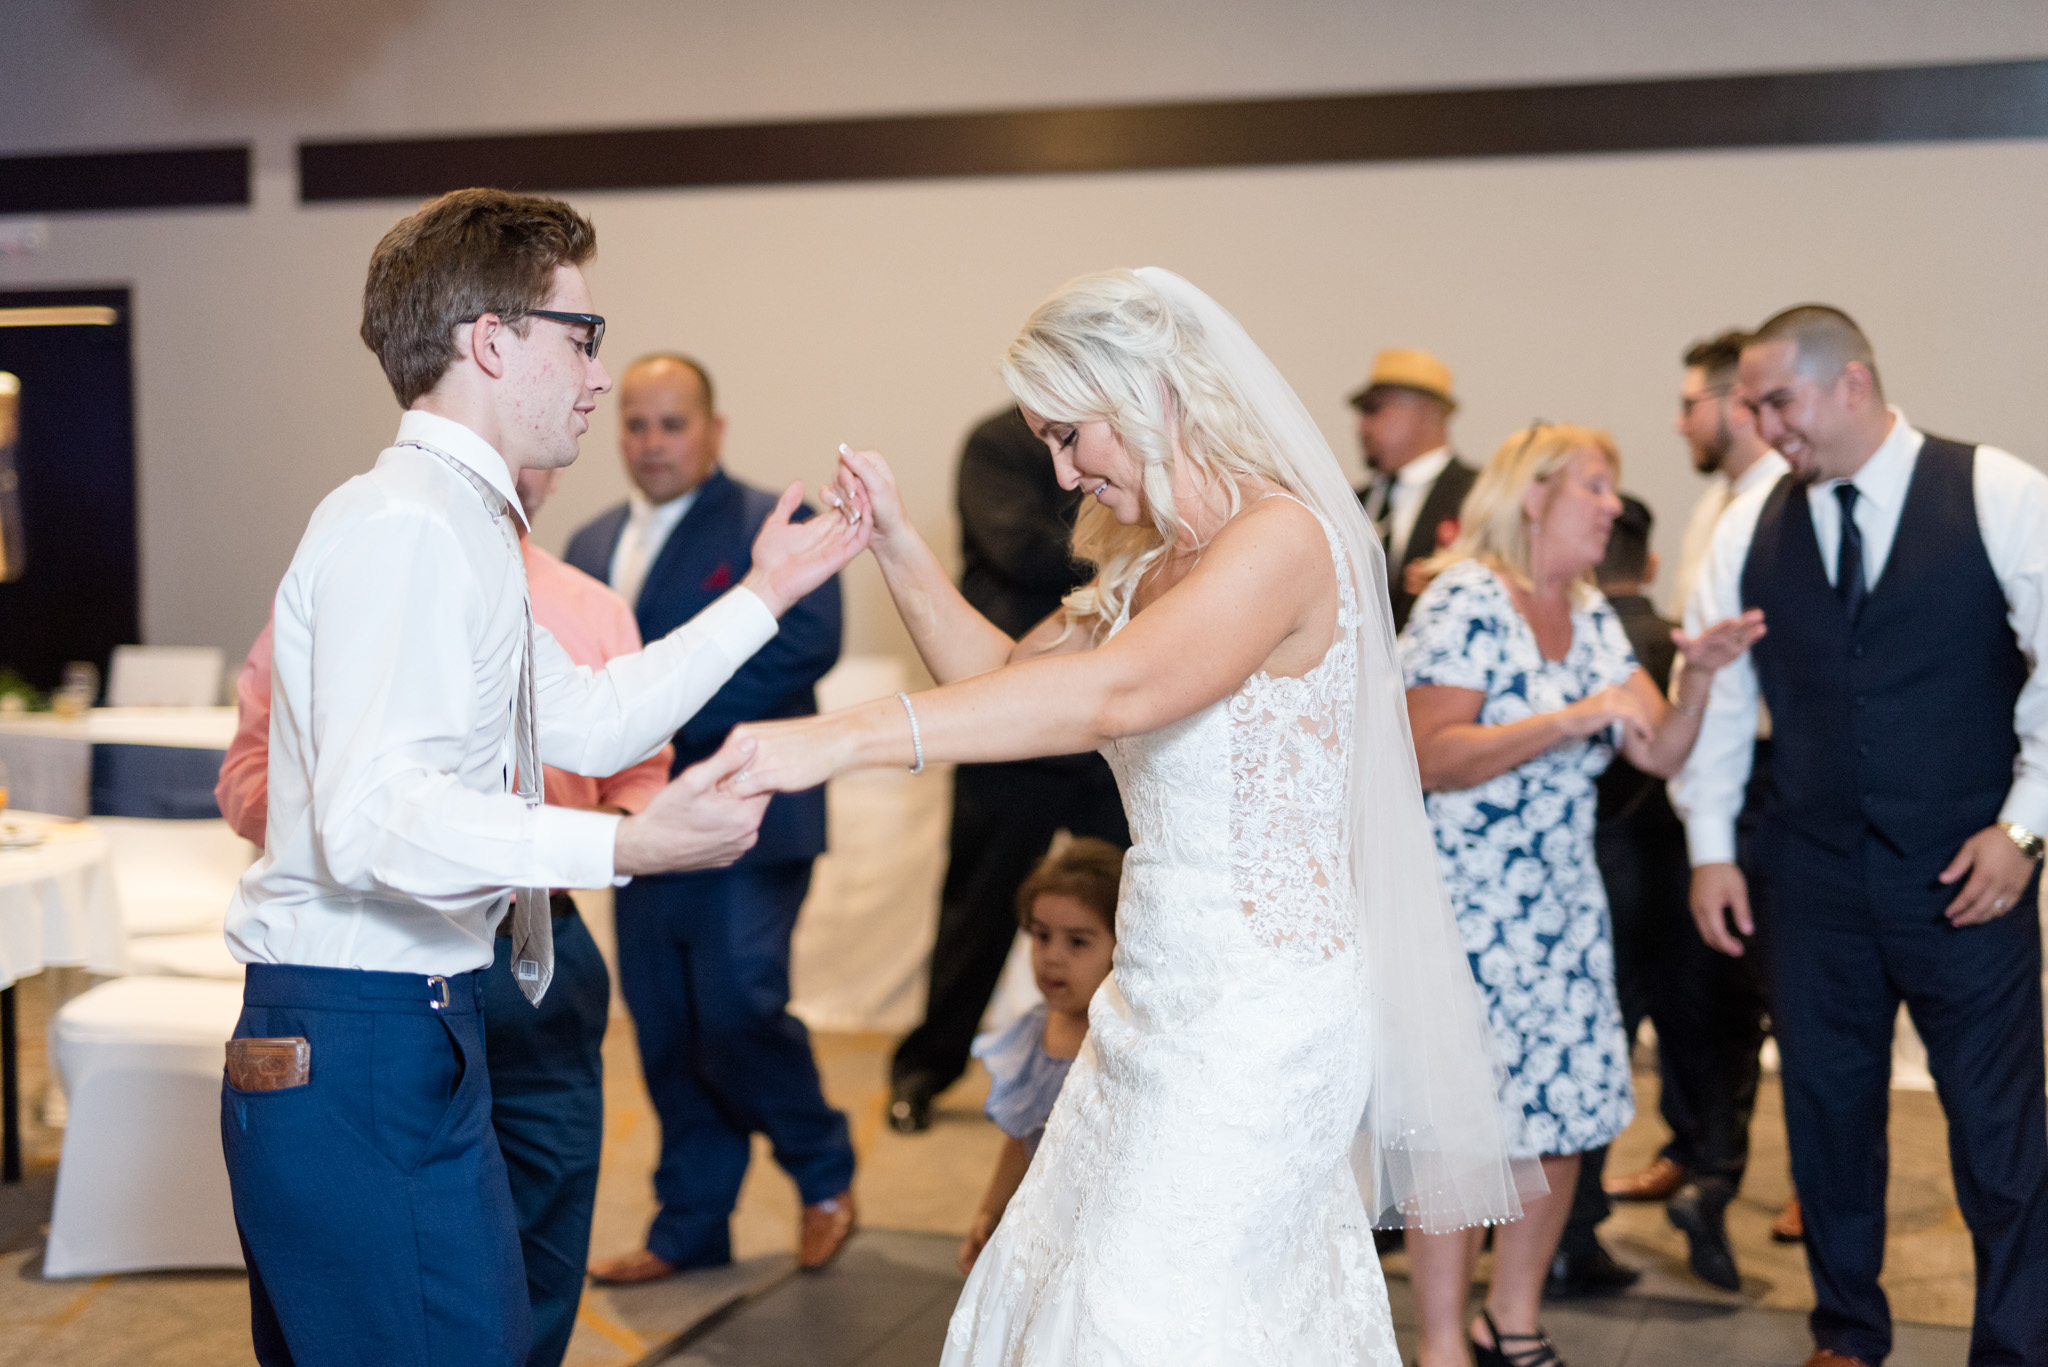 Bride and brother dance.